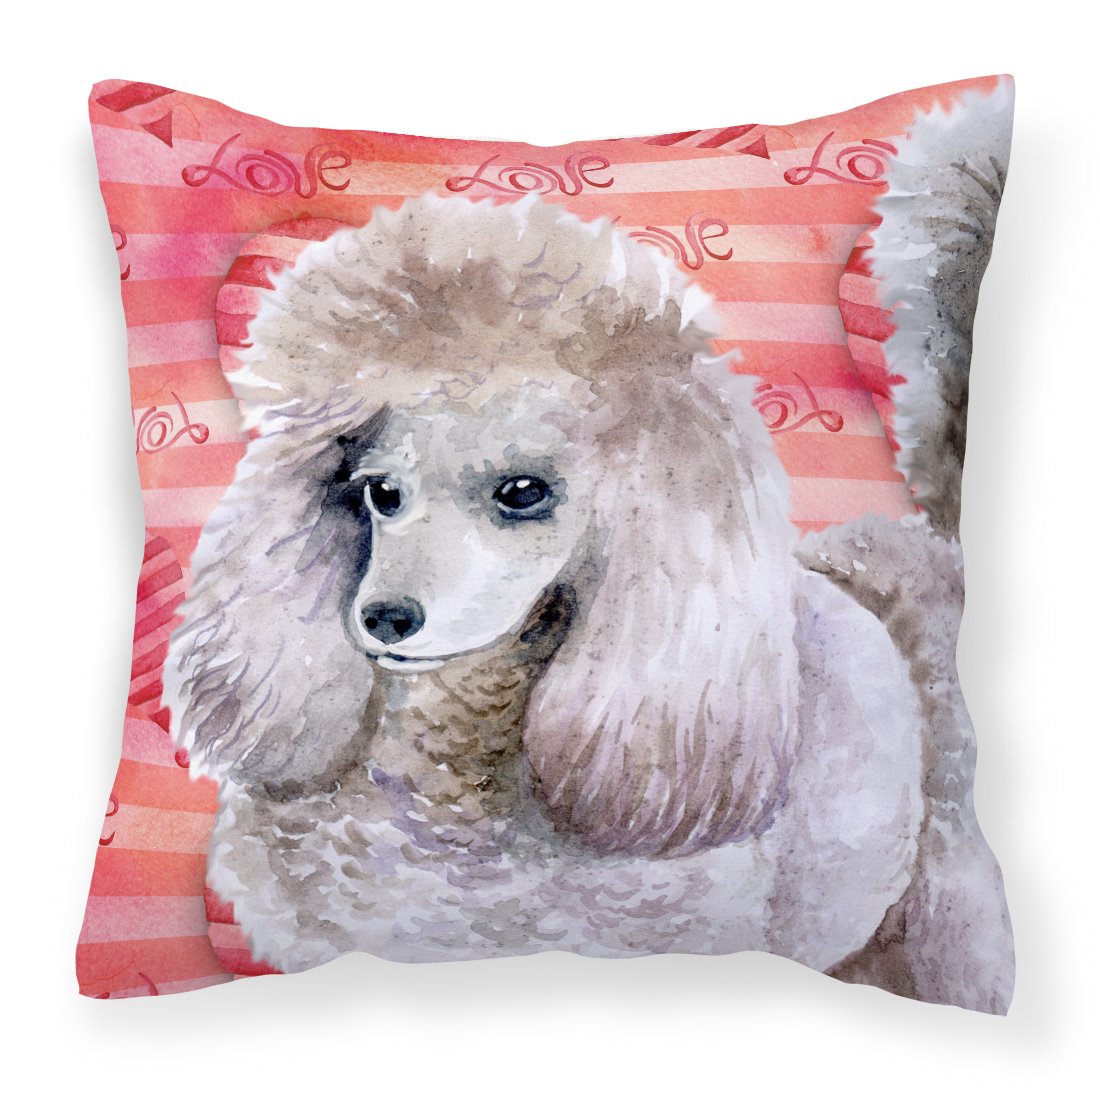 Poodle Love Fabric Decorative Pillow BB9752PW1818 by Caroline's Treasures